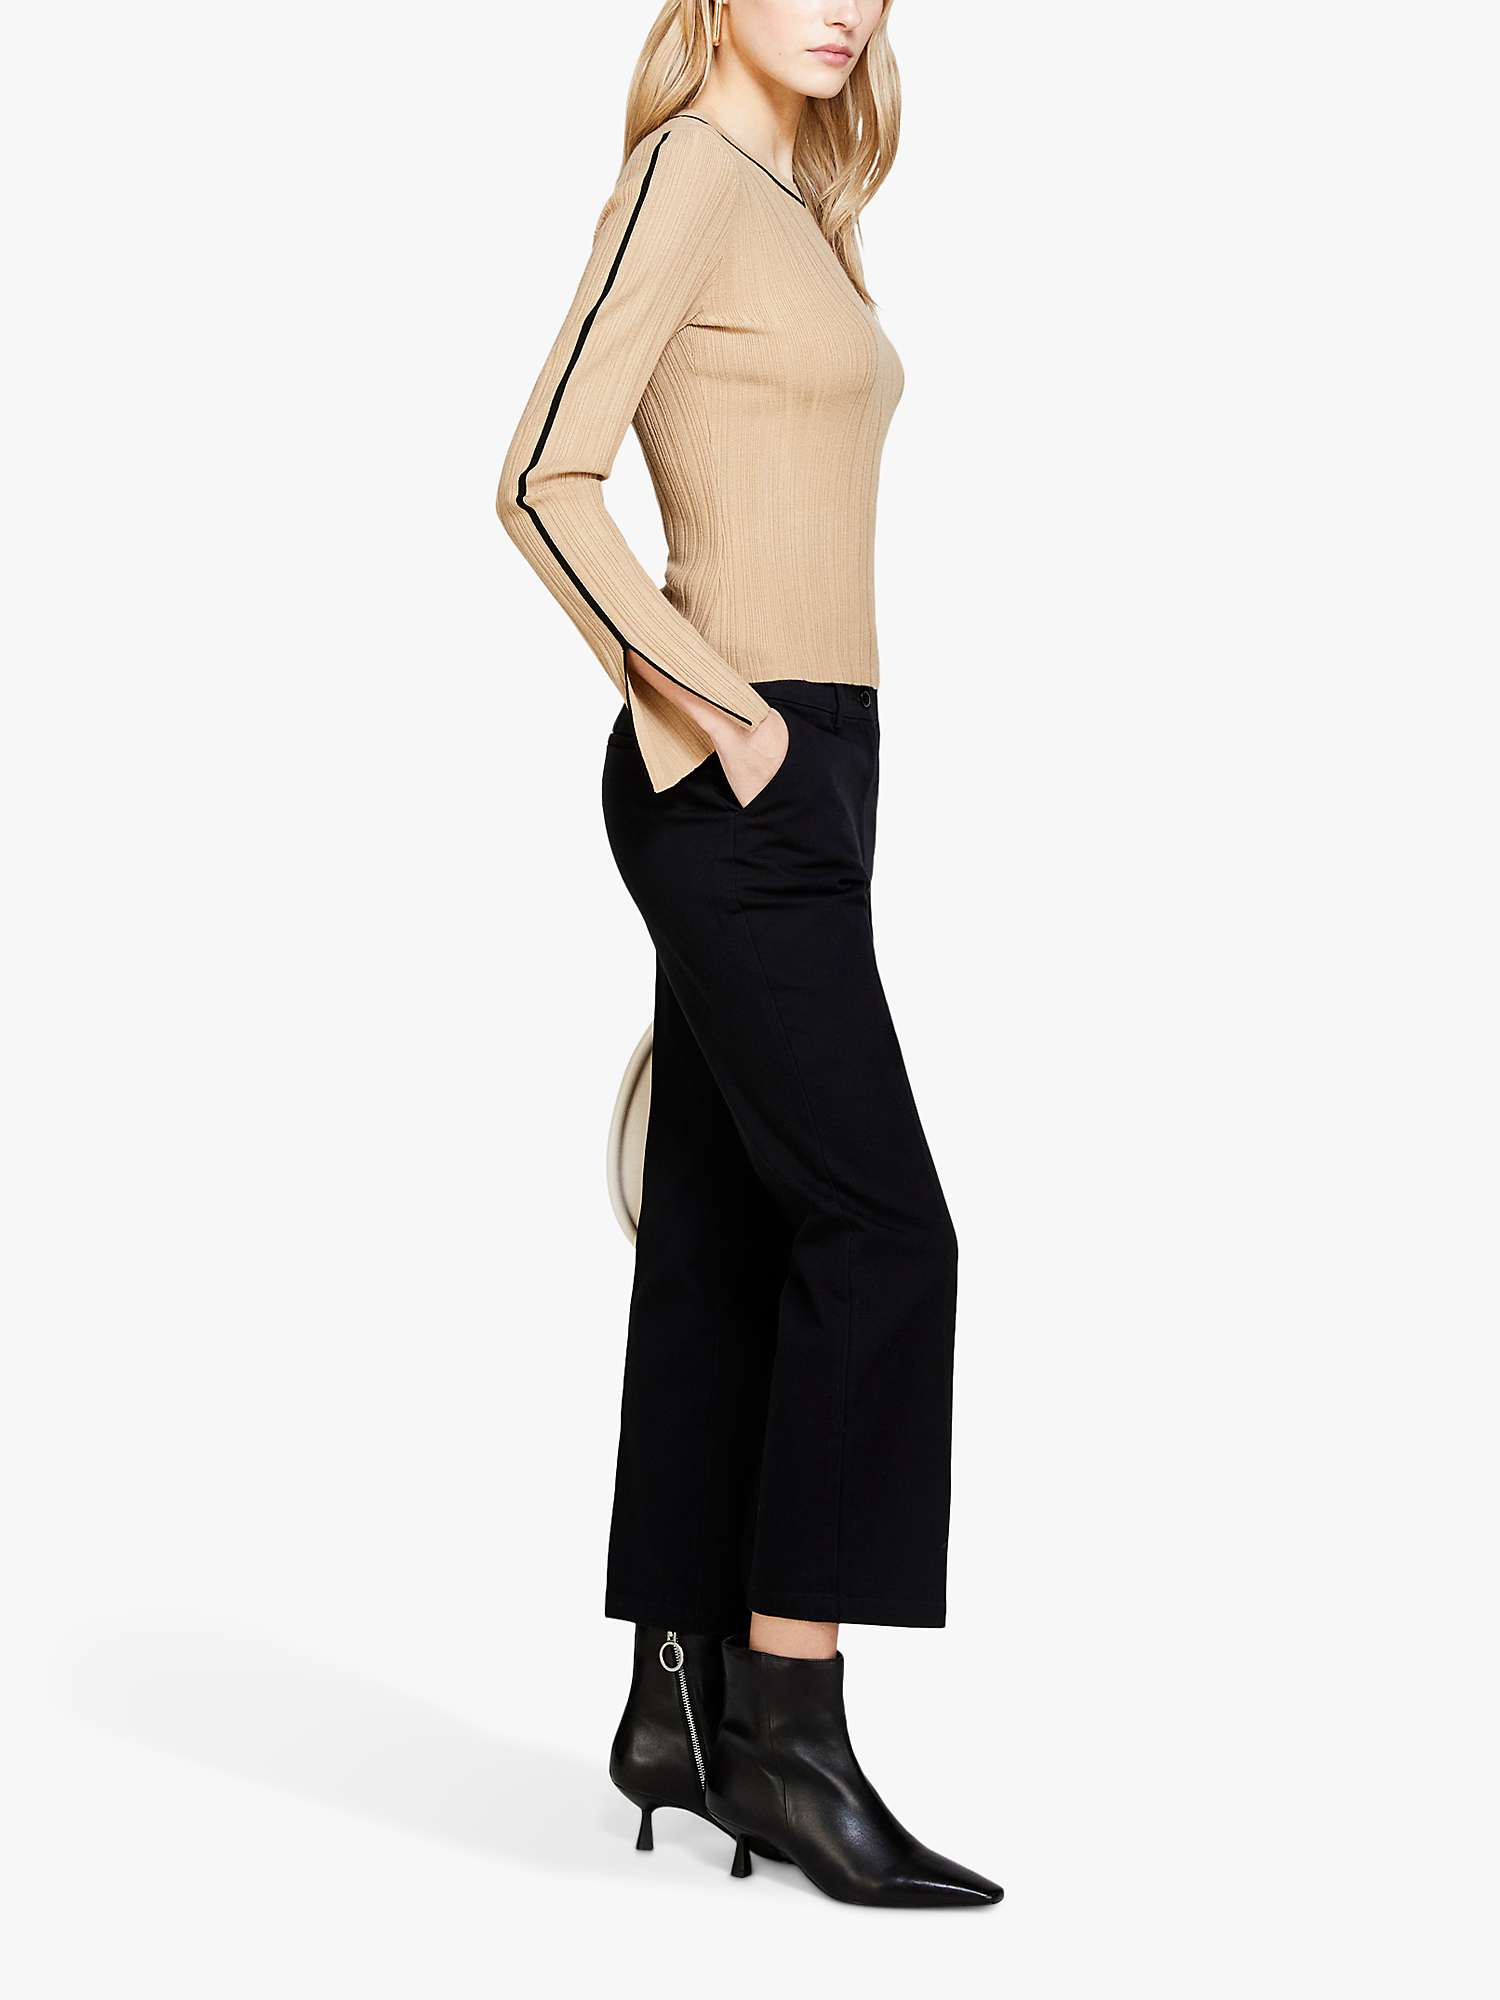 Buy SISLEY Cropped Trousers Online at johnlewis.com